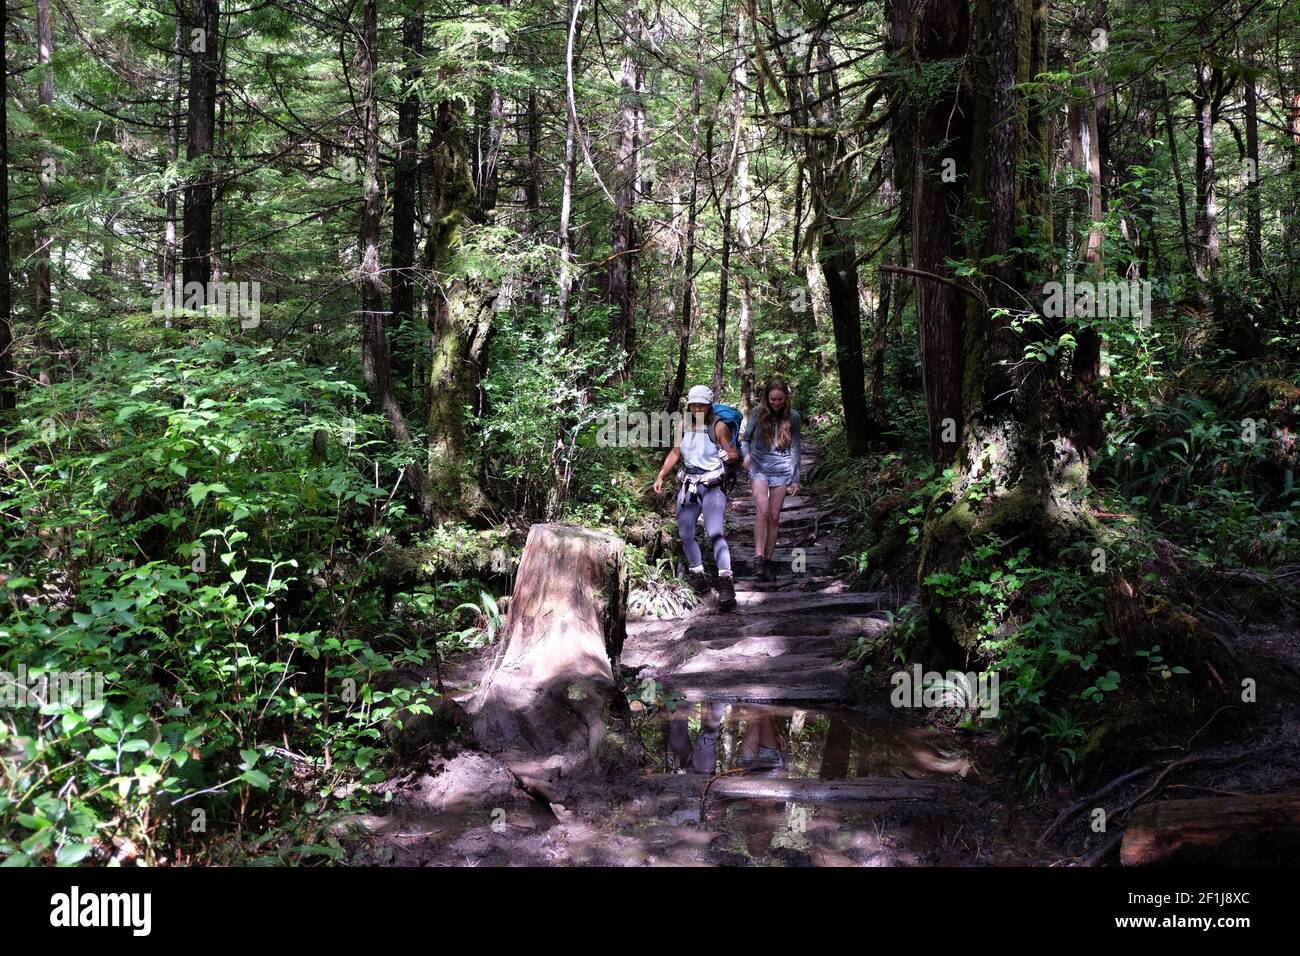 Two women hiking in the forest. Stock Photo